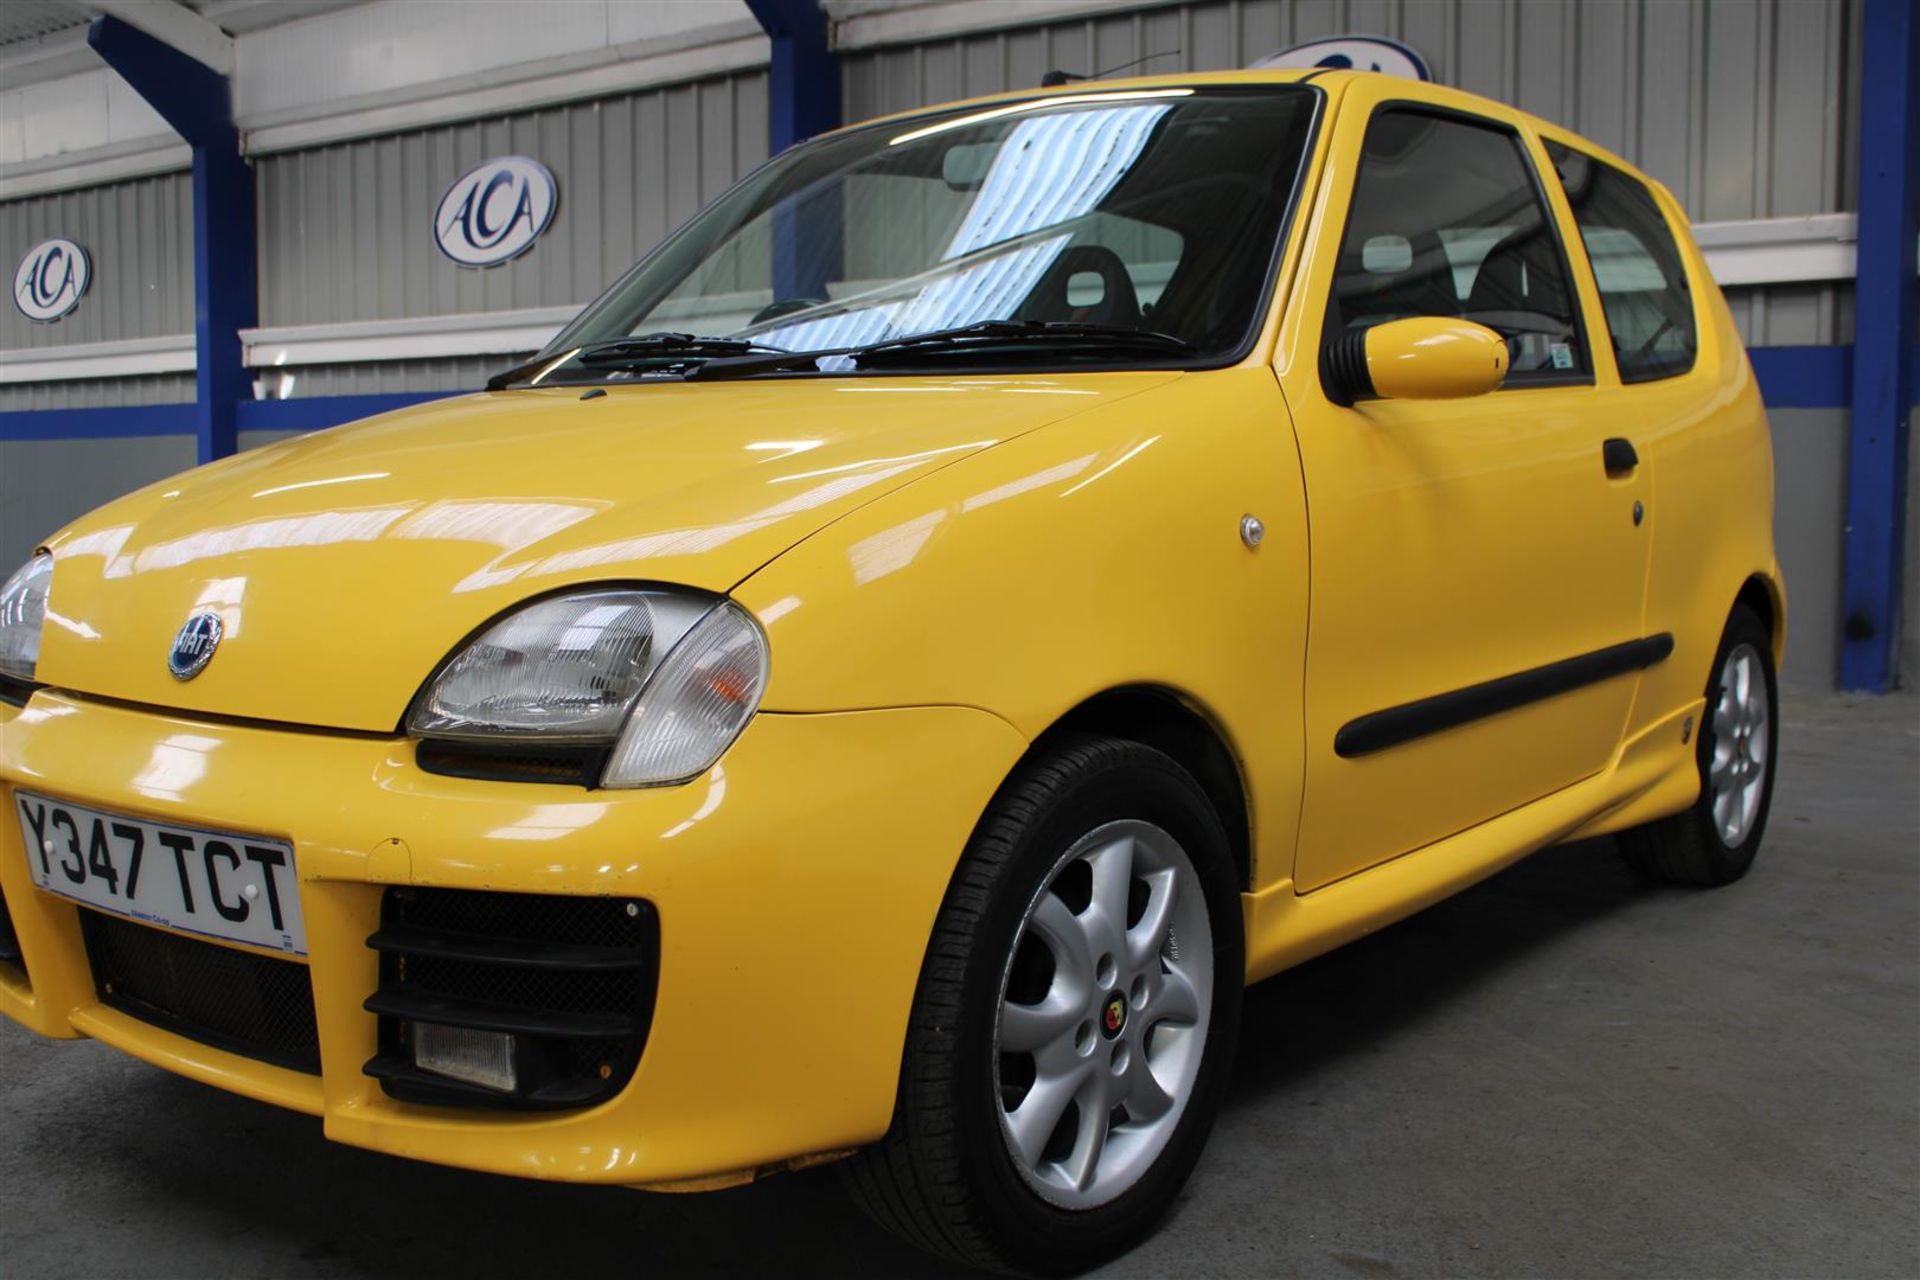 2001 Fiat Seicento Sporting - Image 9 of 20